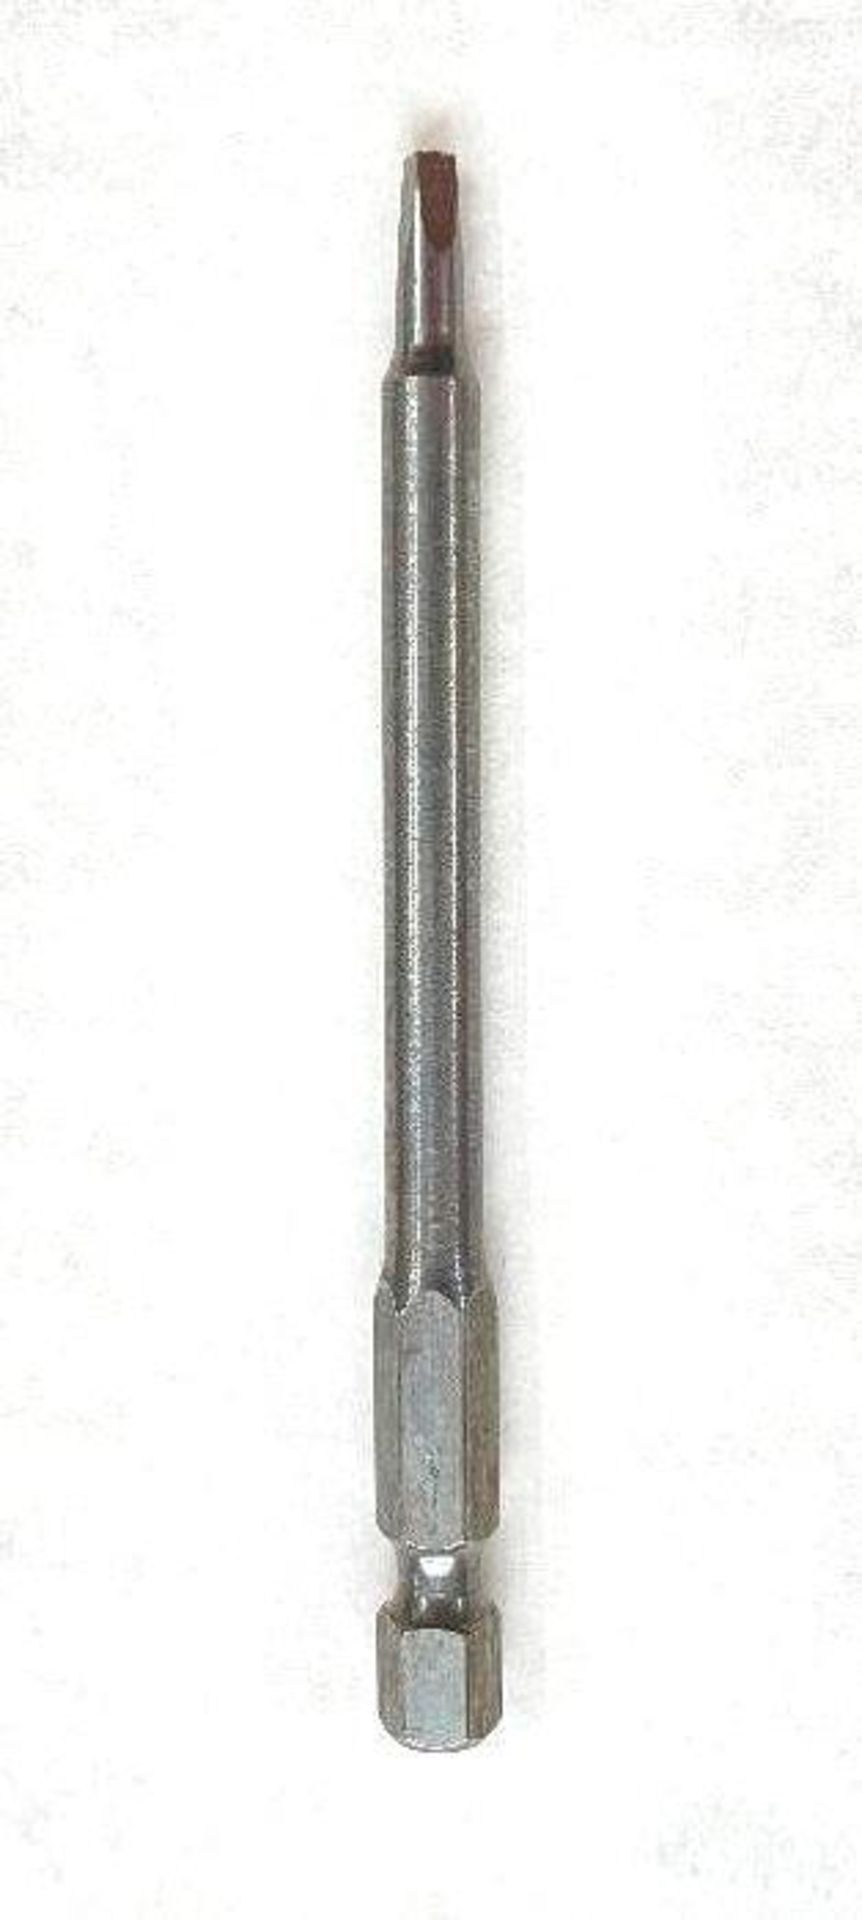 (2000) 1/4" HEX SQUARE RECESS POWER BIT, R1, 3-1/2" LONG BRAND/MODEL EAZYPOWER 80580 RETAIL PRICE (T